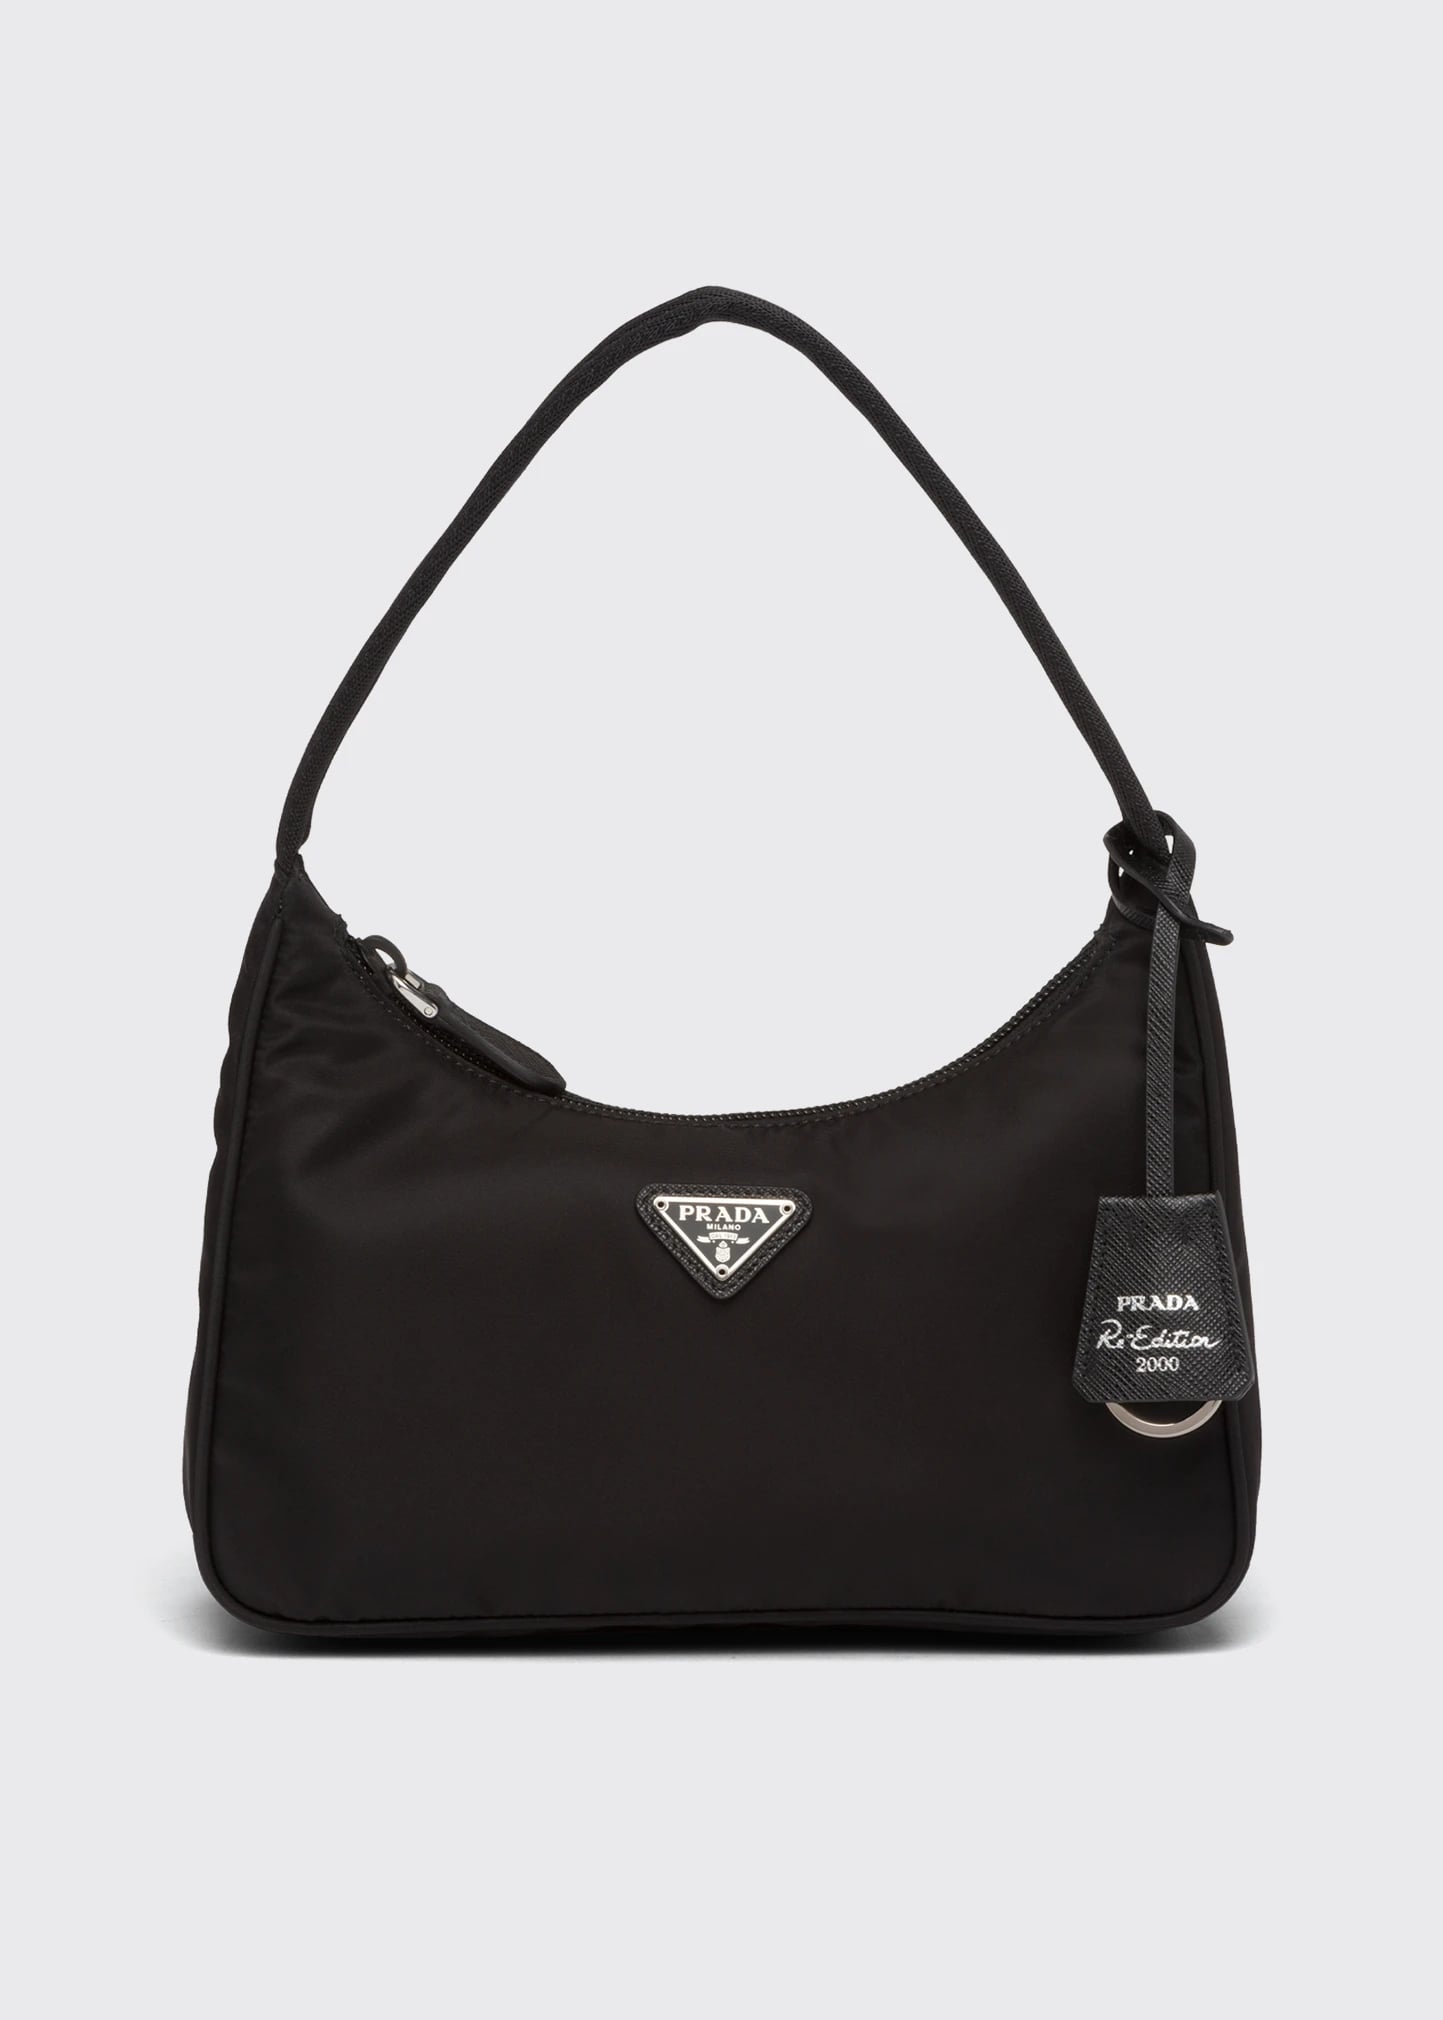 Was on the hunt for a small black shoulder bag and this one fit